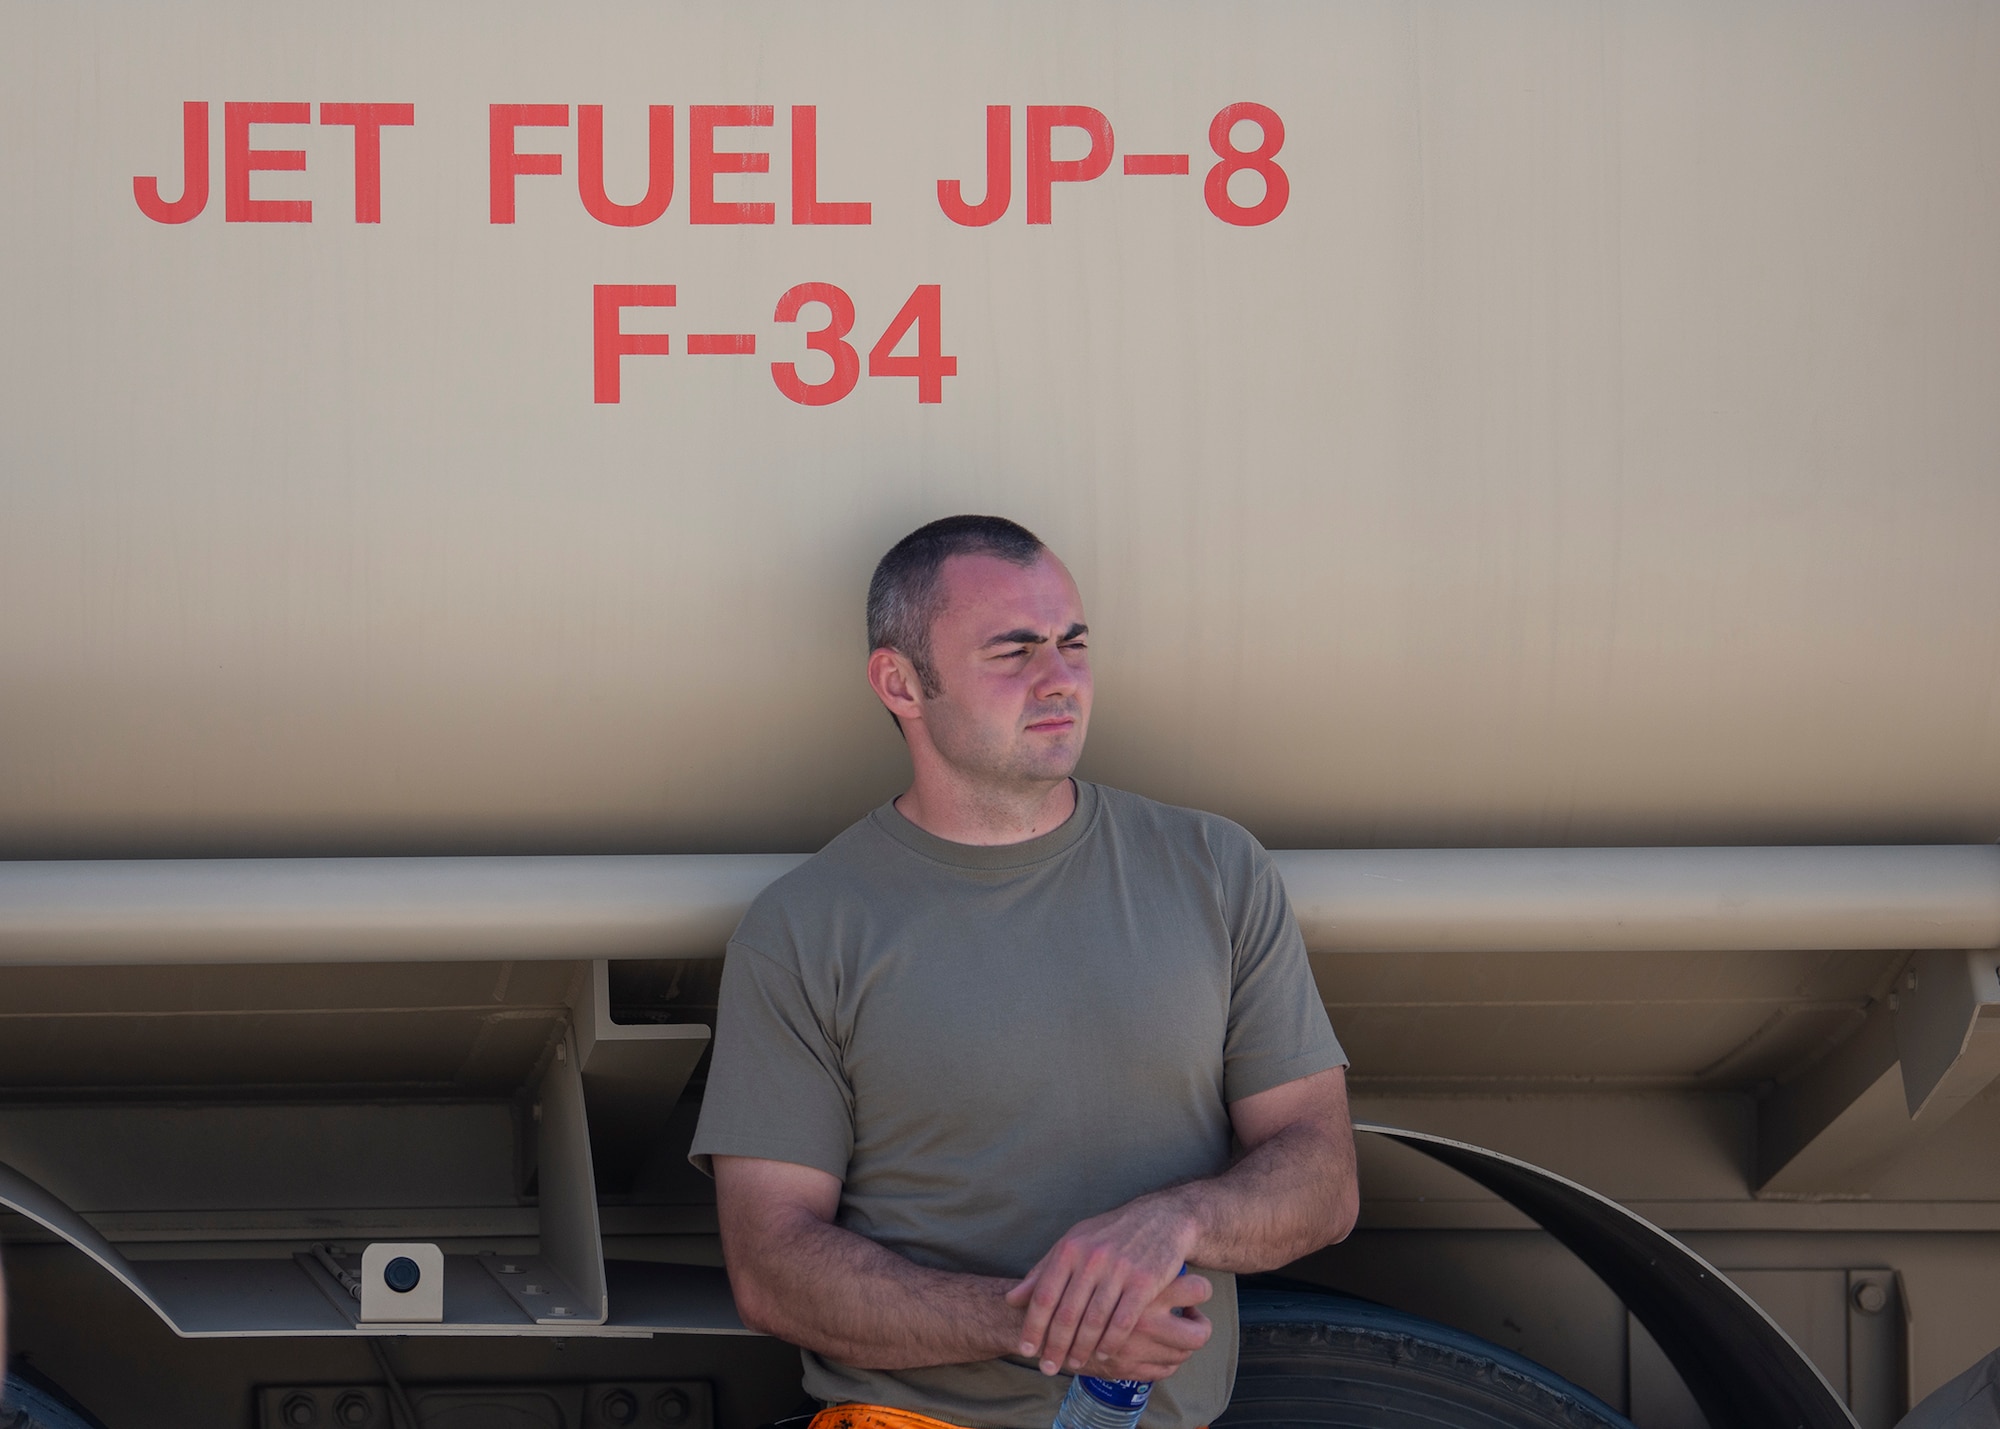 The 380th Expeditionary Logistics Readiness Squadron conducted hot-pit refueling in support of 332nd AEW aircraft maintainers to enable rapid air operations within the U.S. Central Command area of responsibility.